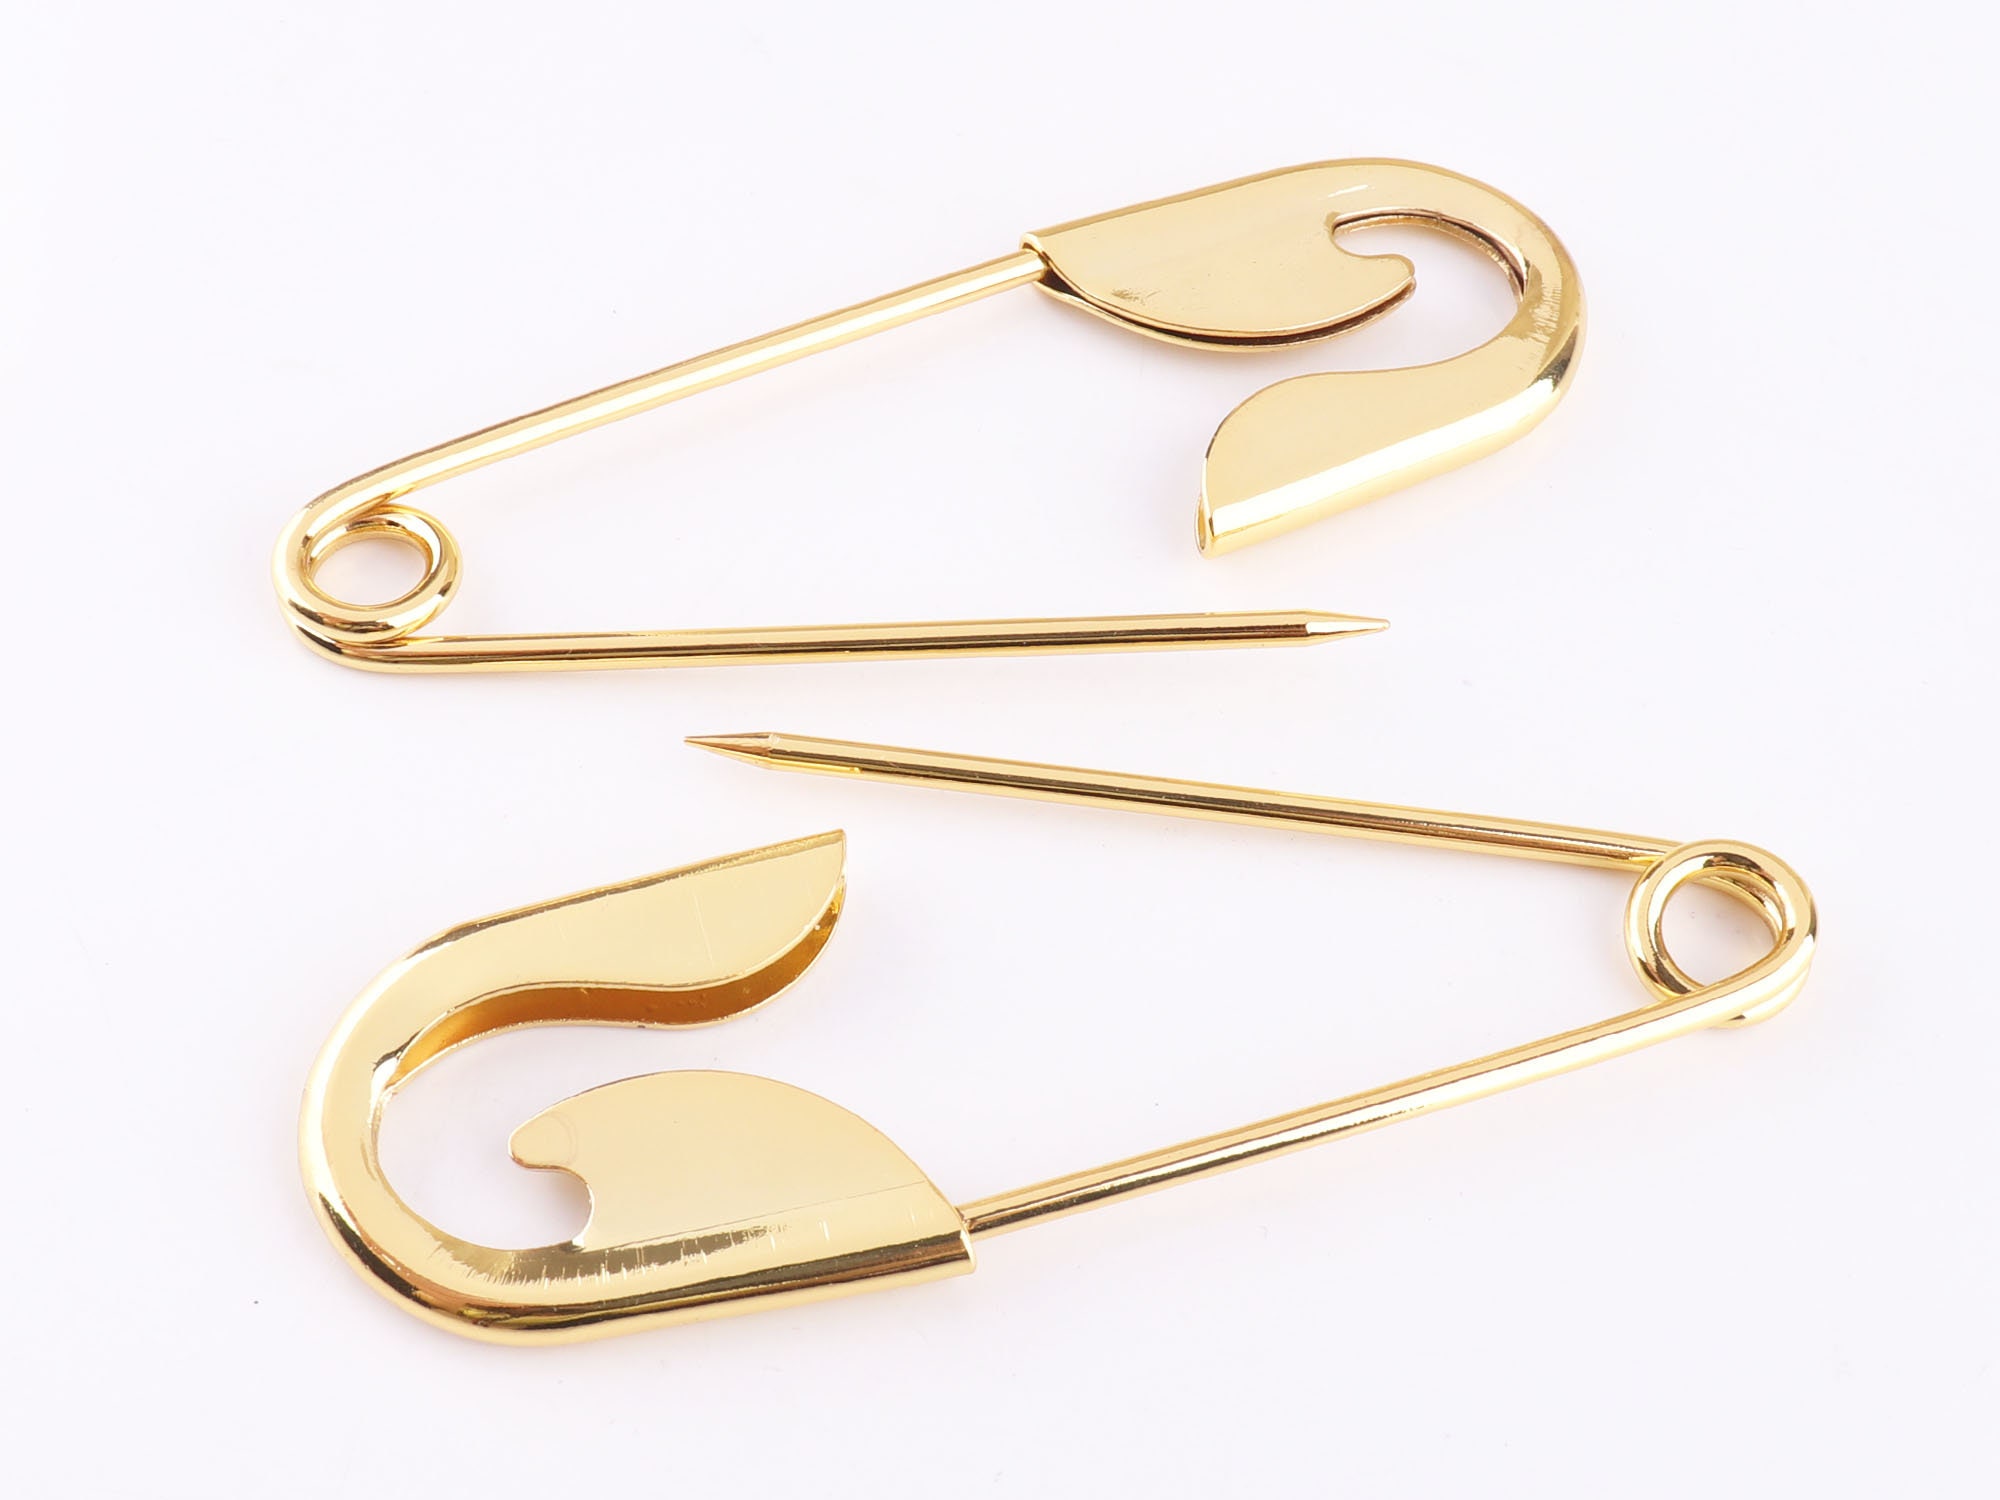 10032mm Mega Giant Safety Pin Brooch Deluxe Kilt Scarf Pin,1.2 Inch  Gold/rose Gold Charming Shawl Pins Large Sewing Safety Pins Supply 